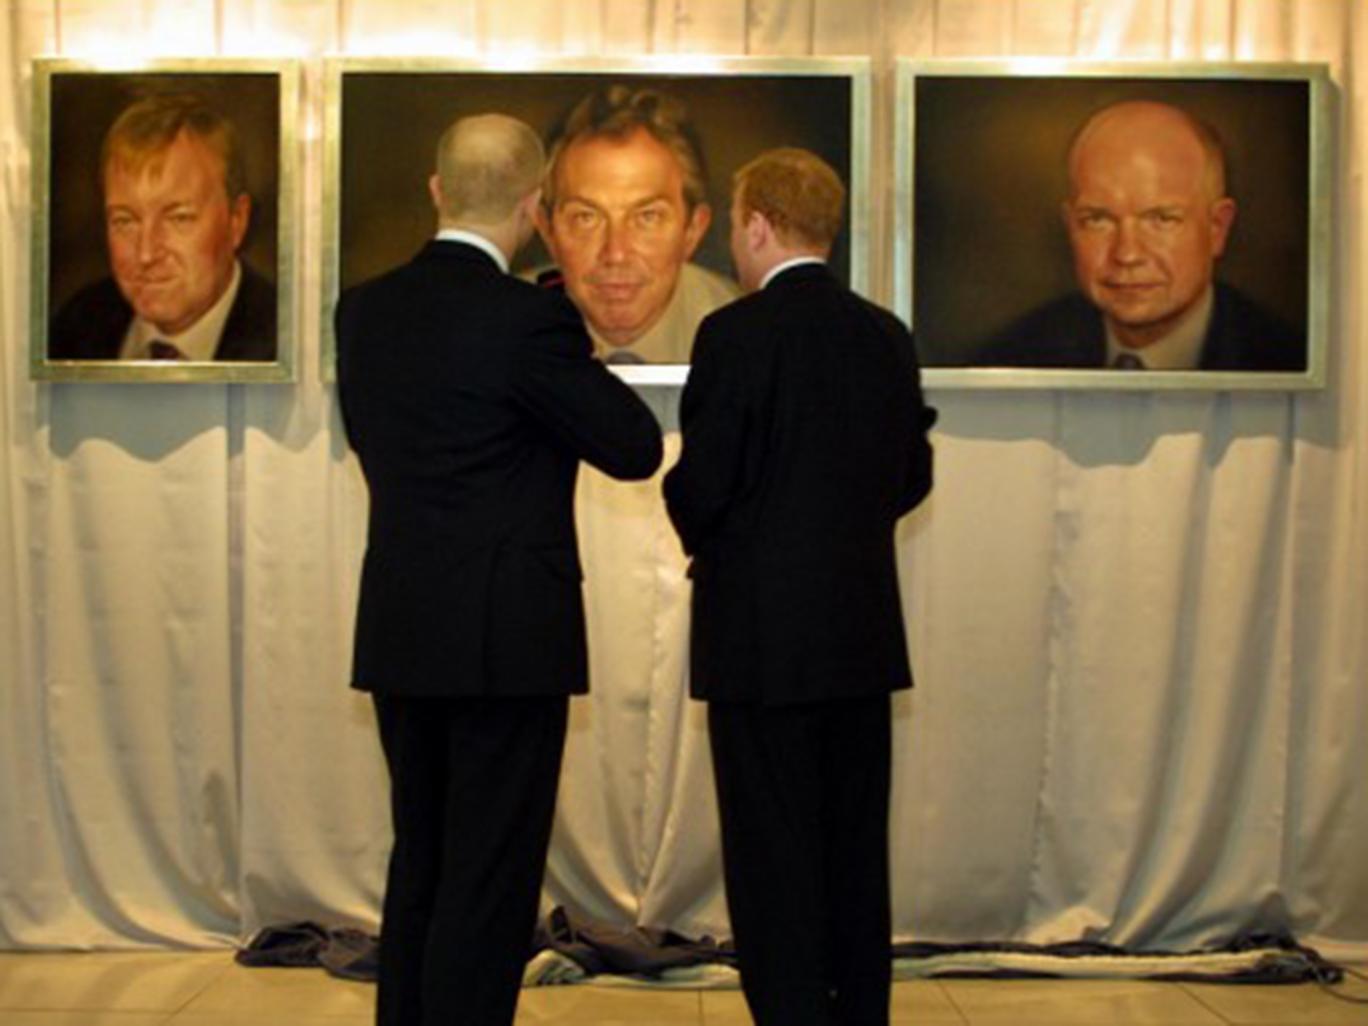 William Hague and Charles Kennedy admire their portraits and that of Tony Blair, all painted by Jonathan Yeo (Photo: David Sandison)